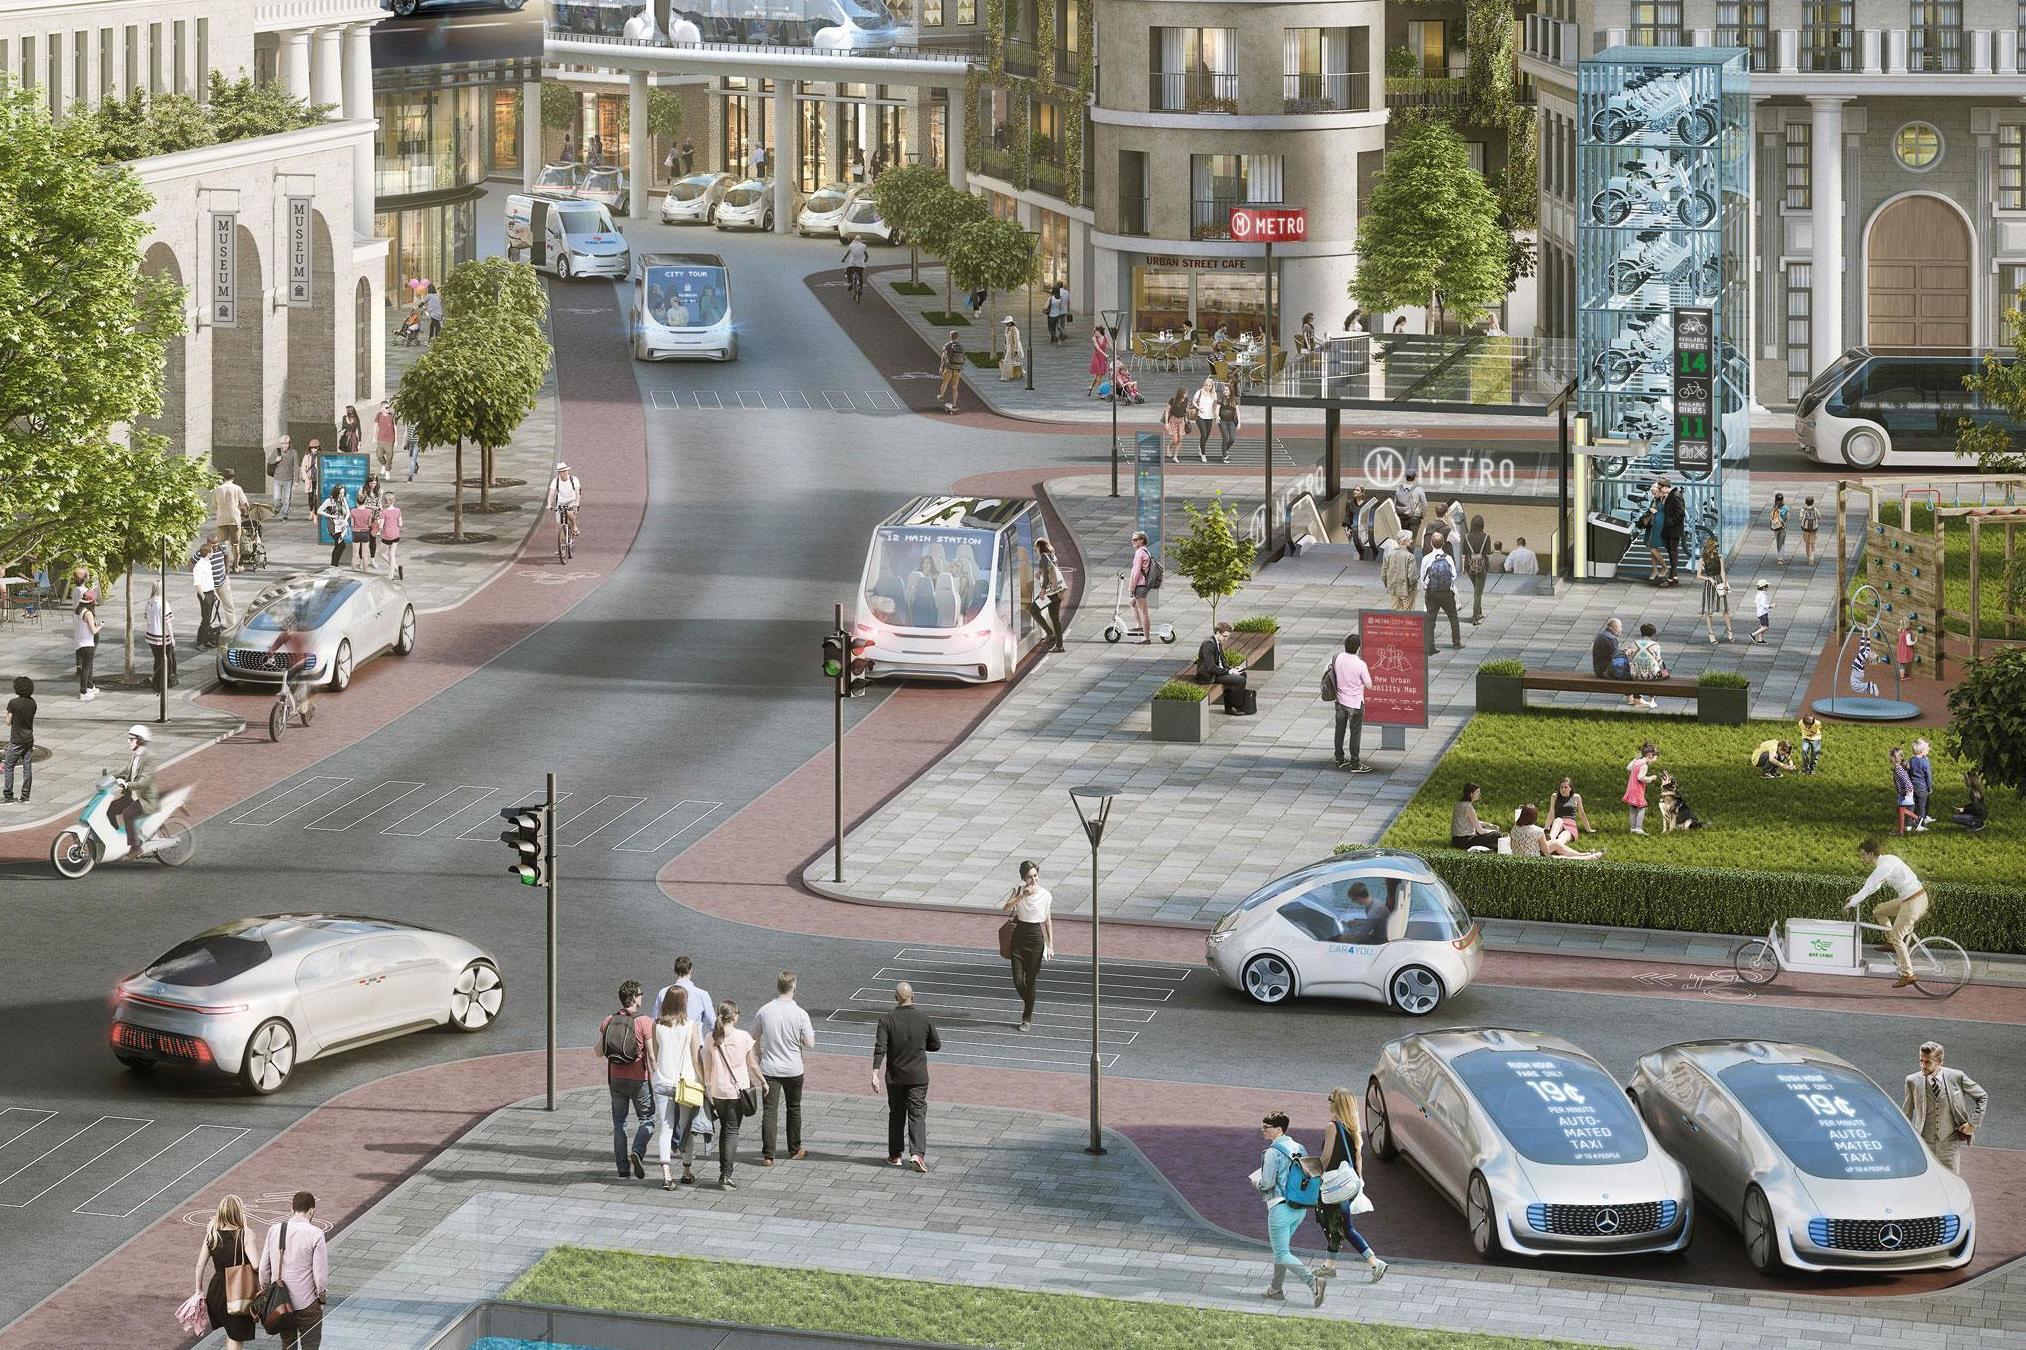 It's unlikely that truly driverless cars will be available under 2050 at the earliest